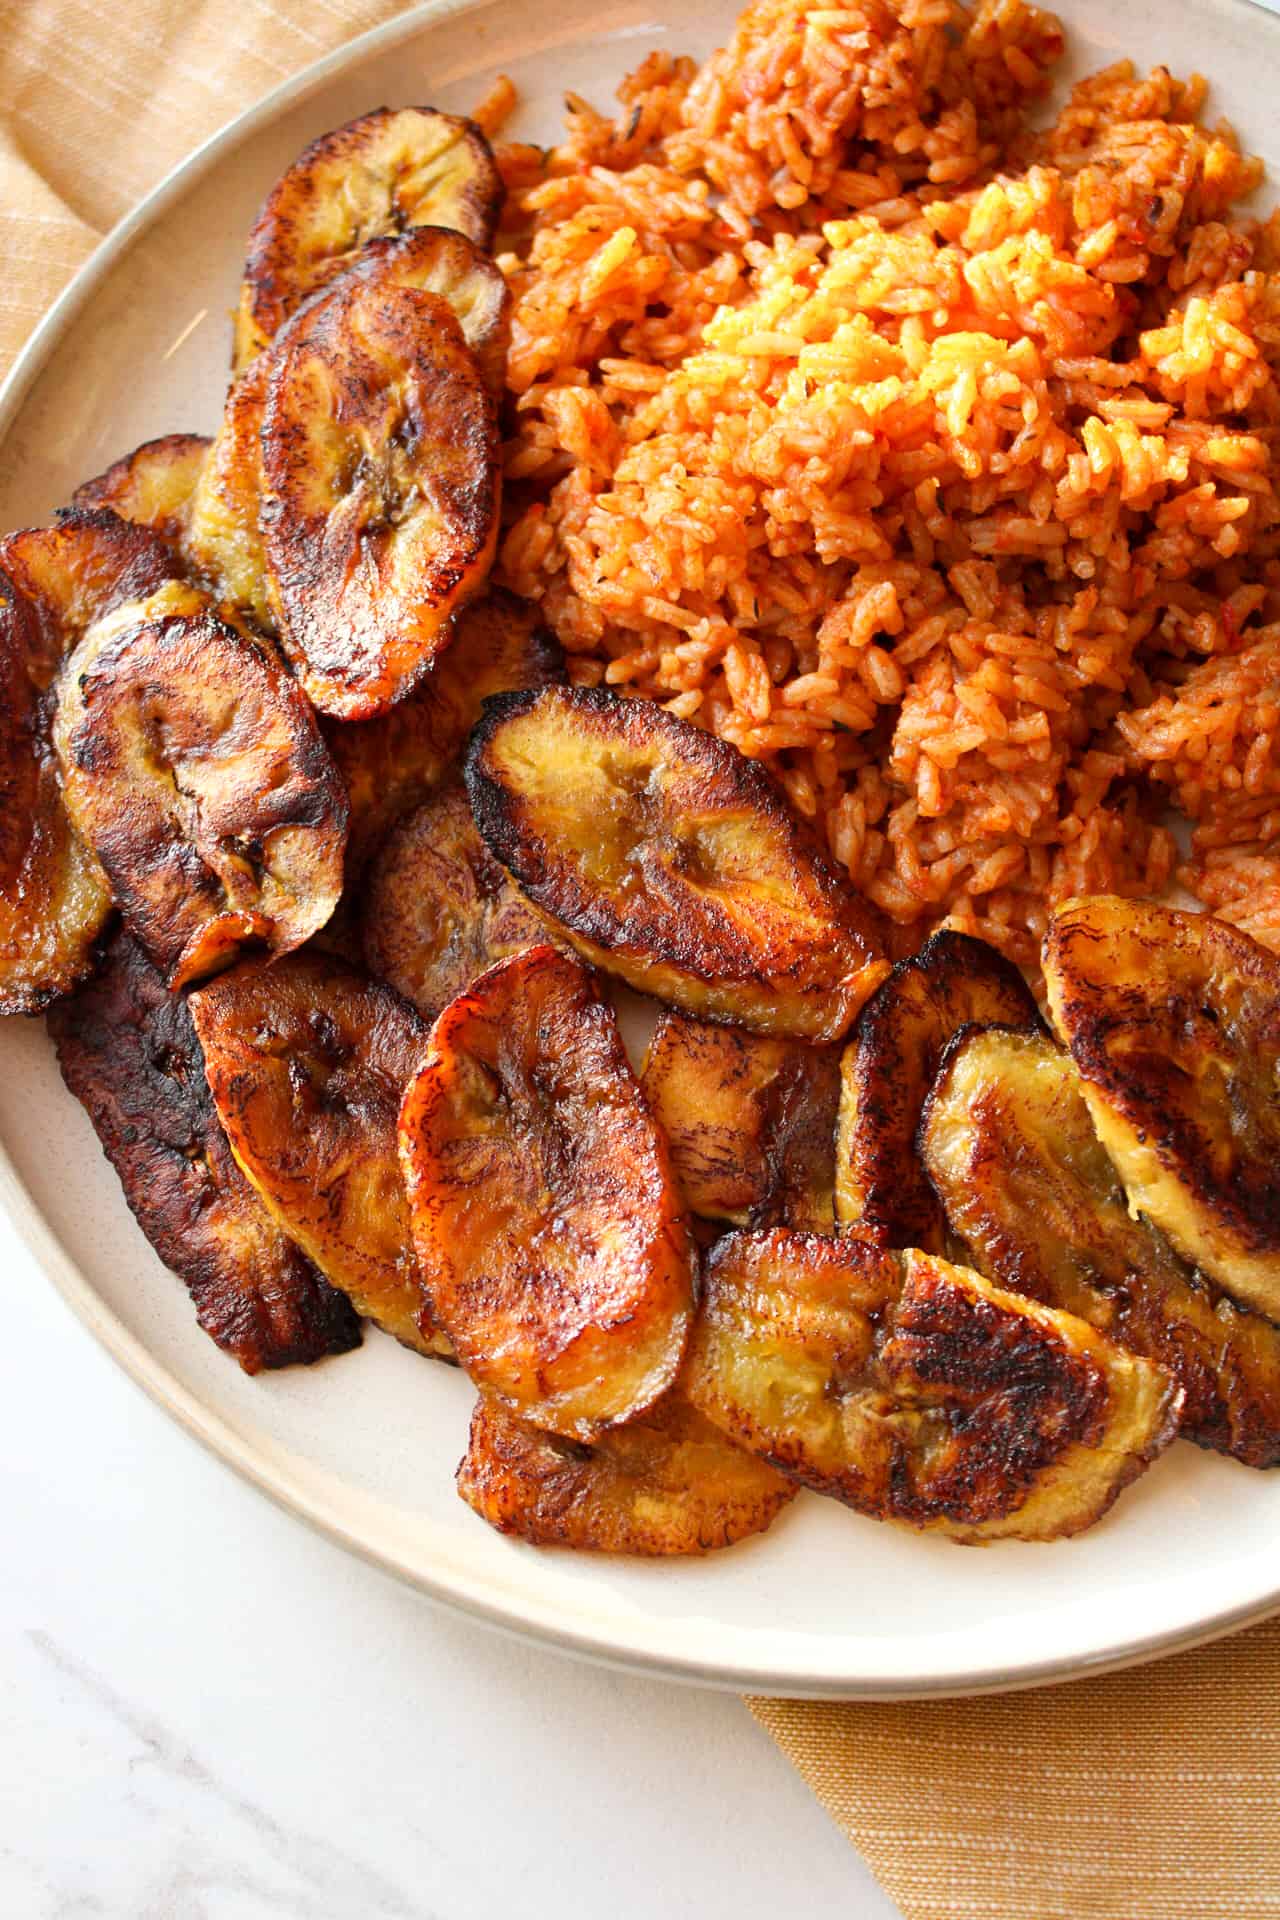 Fried plantains with Jollof rice on plate.